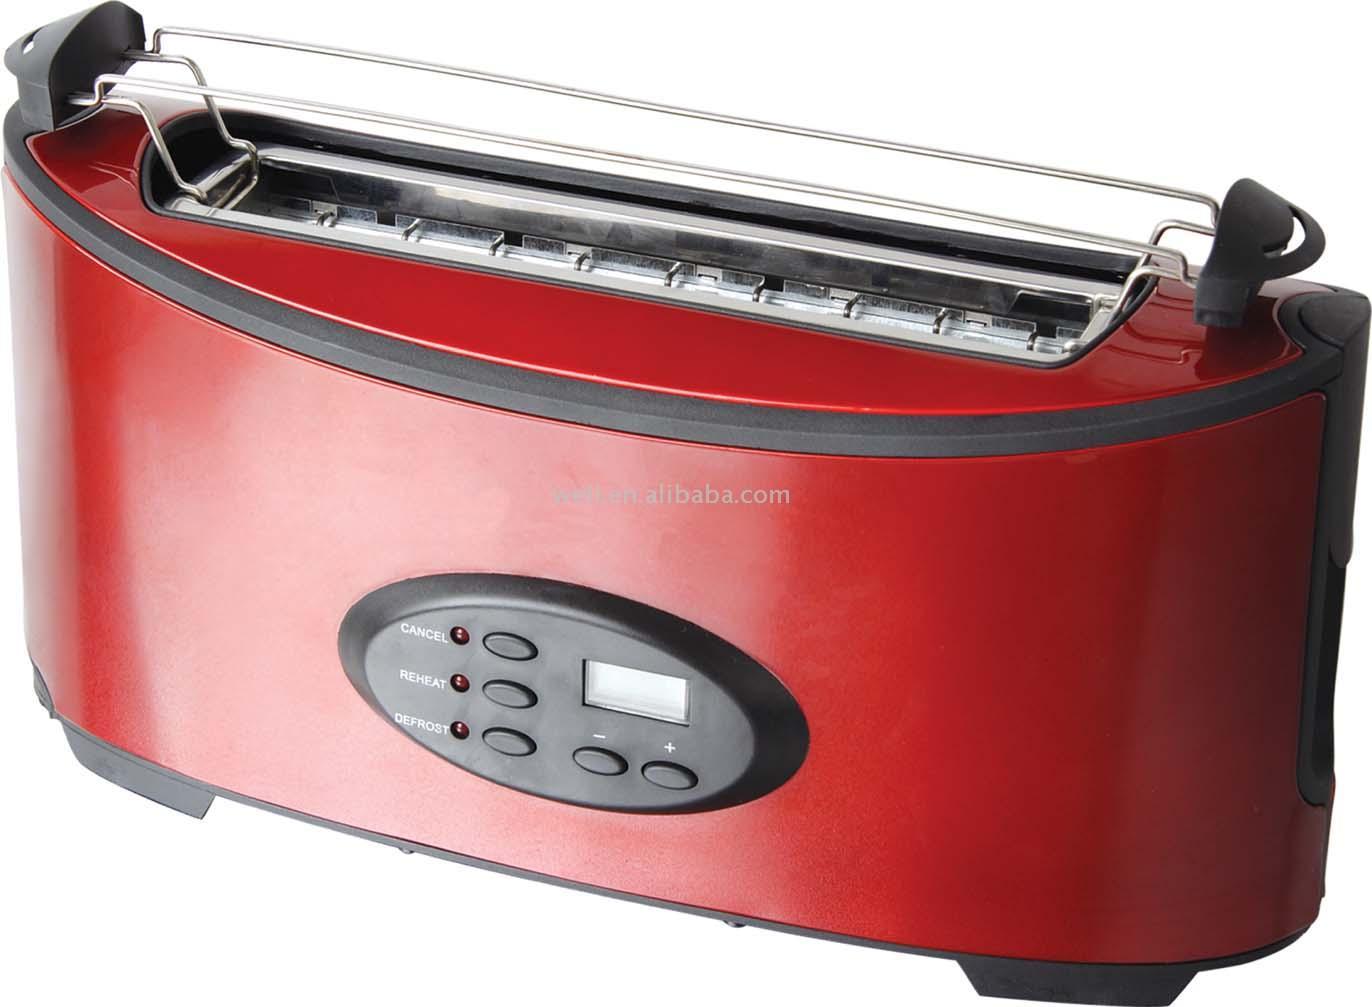  Electric S/S Pop-Up Toaster